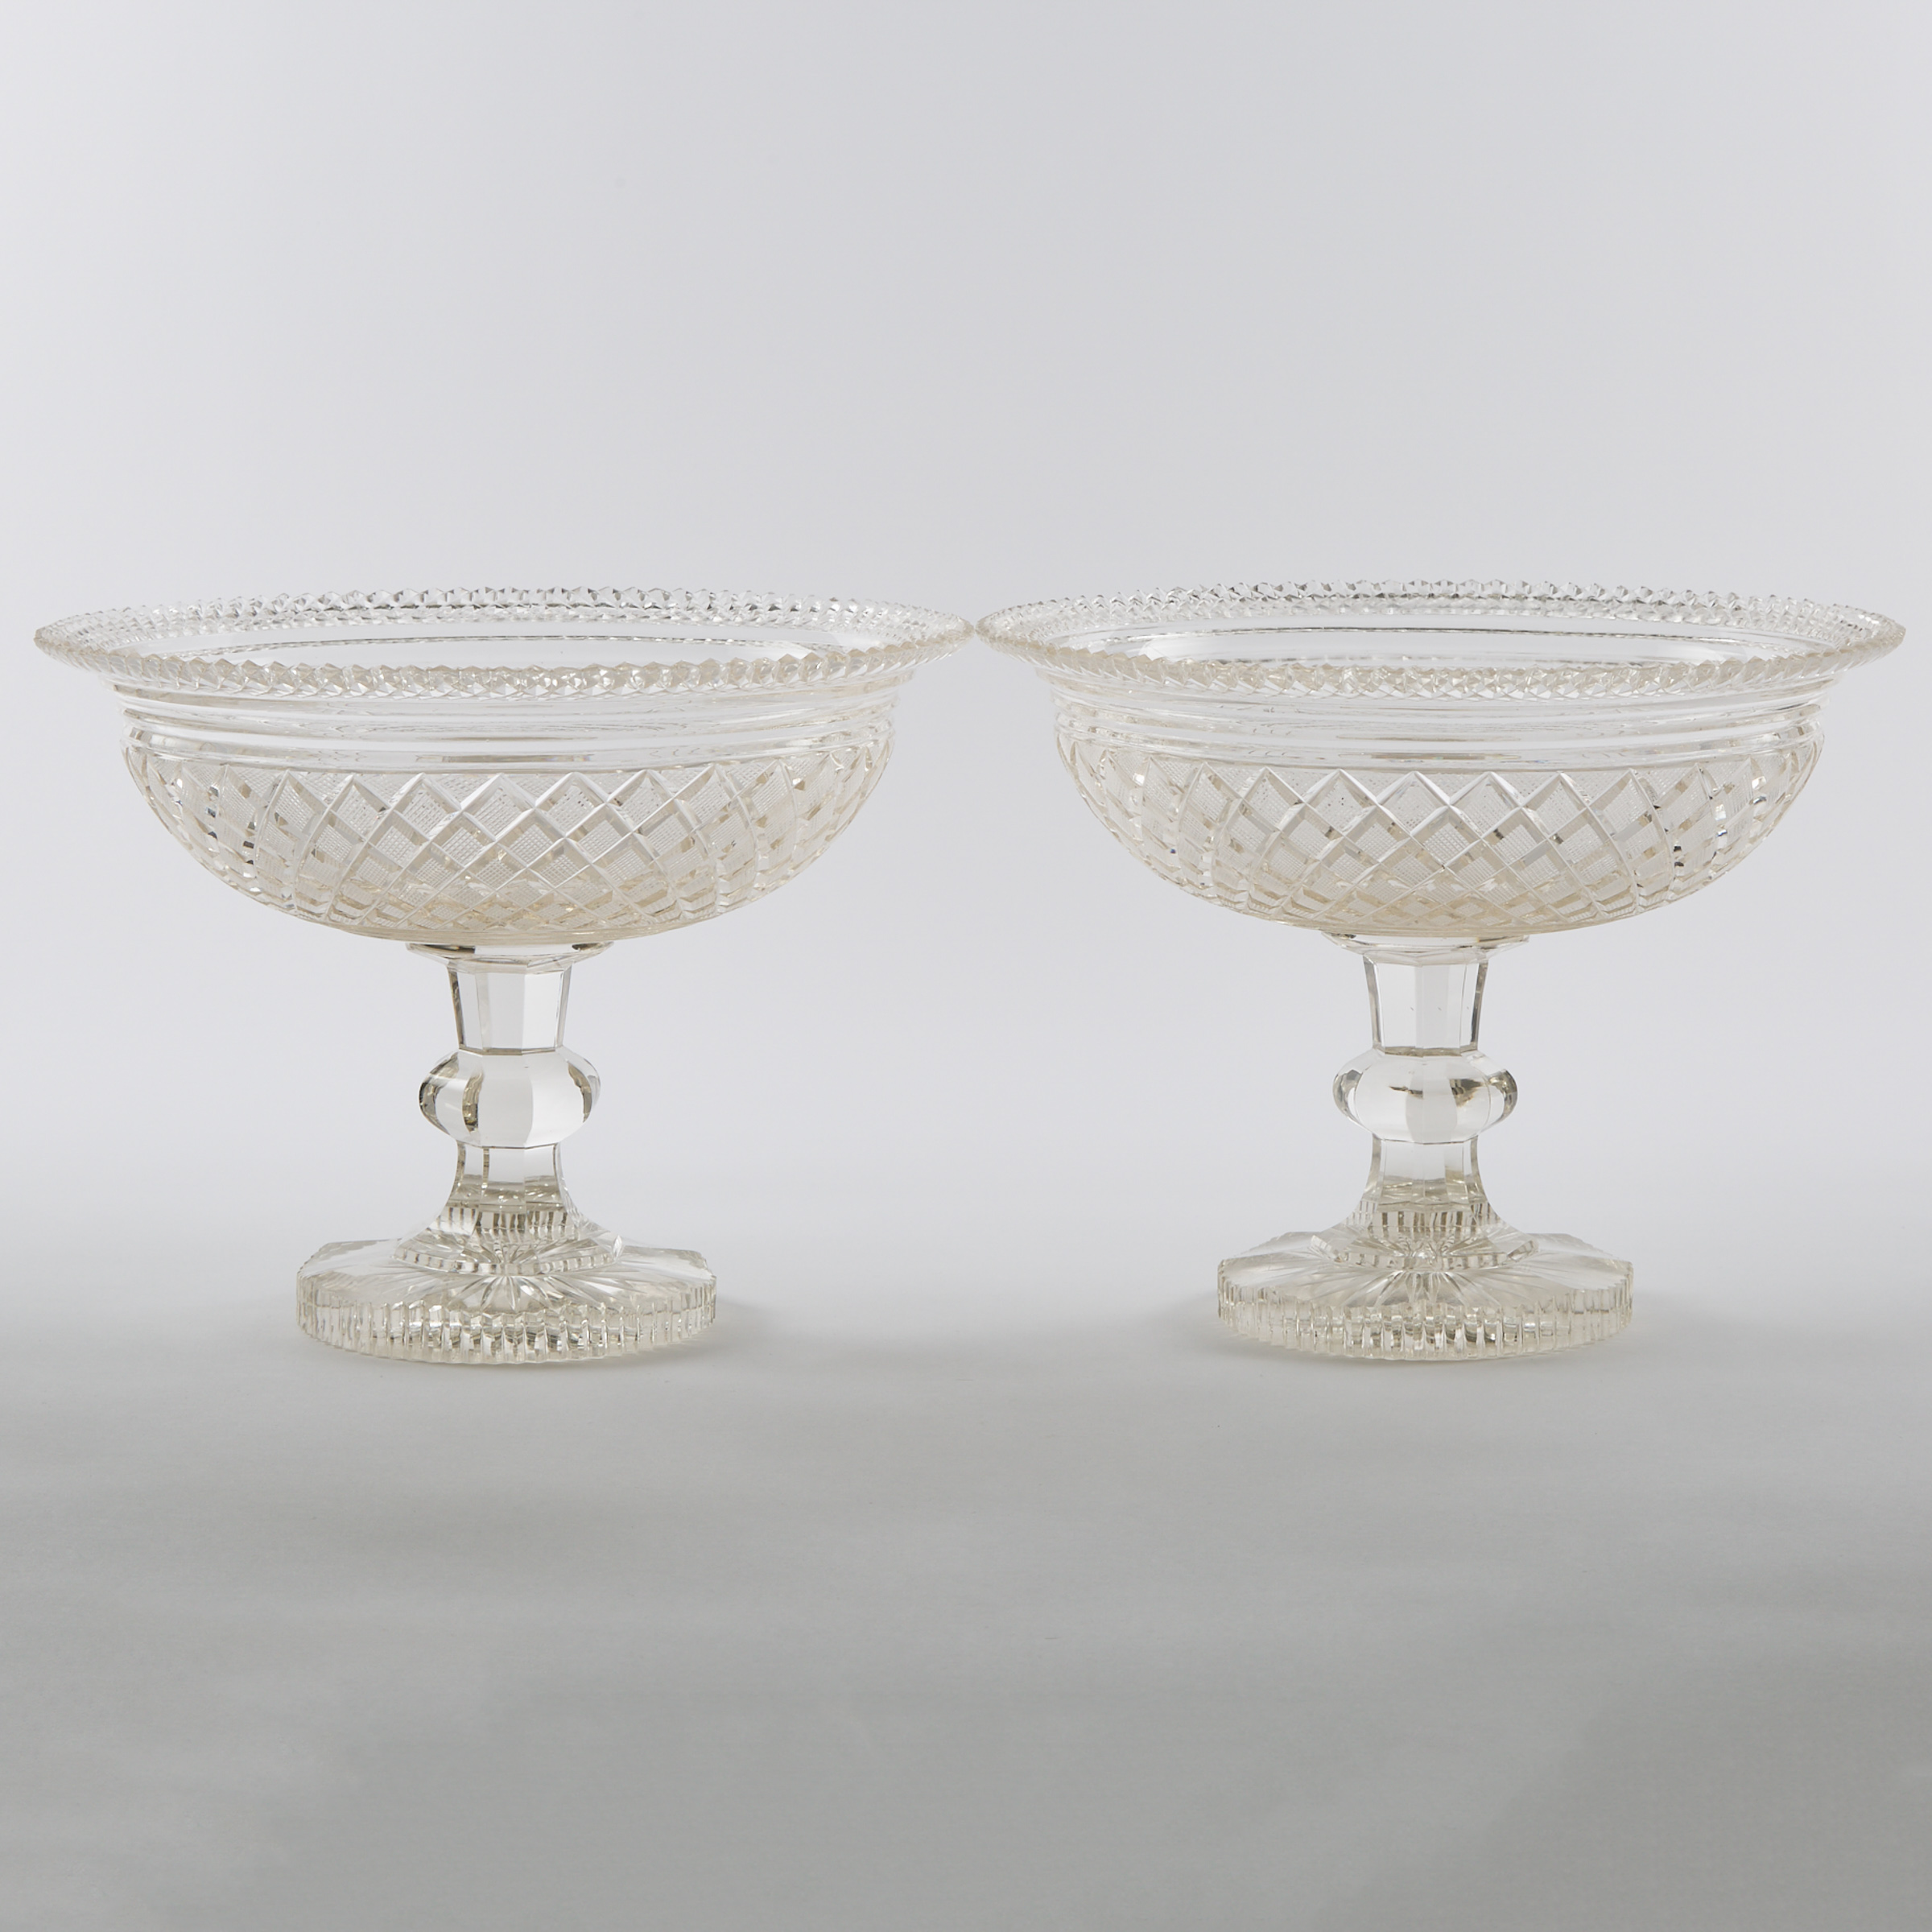 Pair of Continental Cut Glass Footed Comports, late 19th century